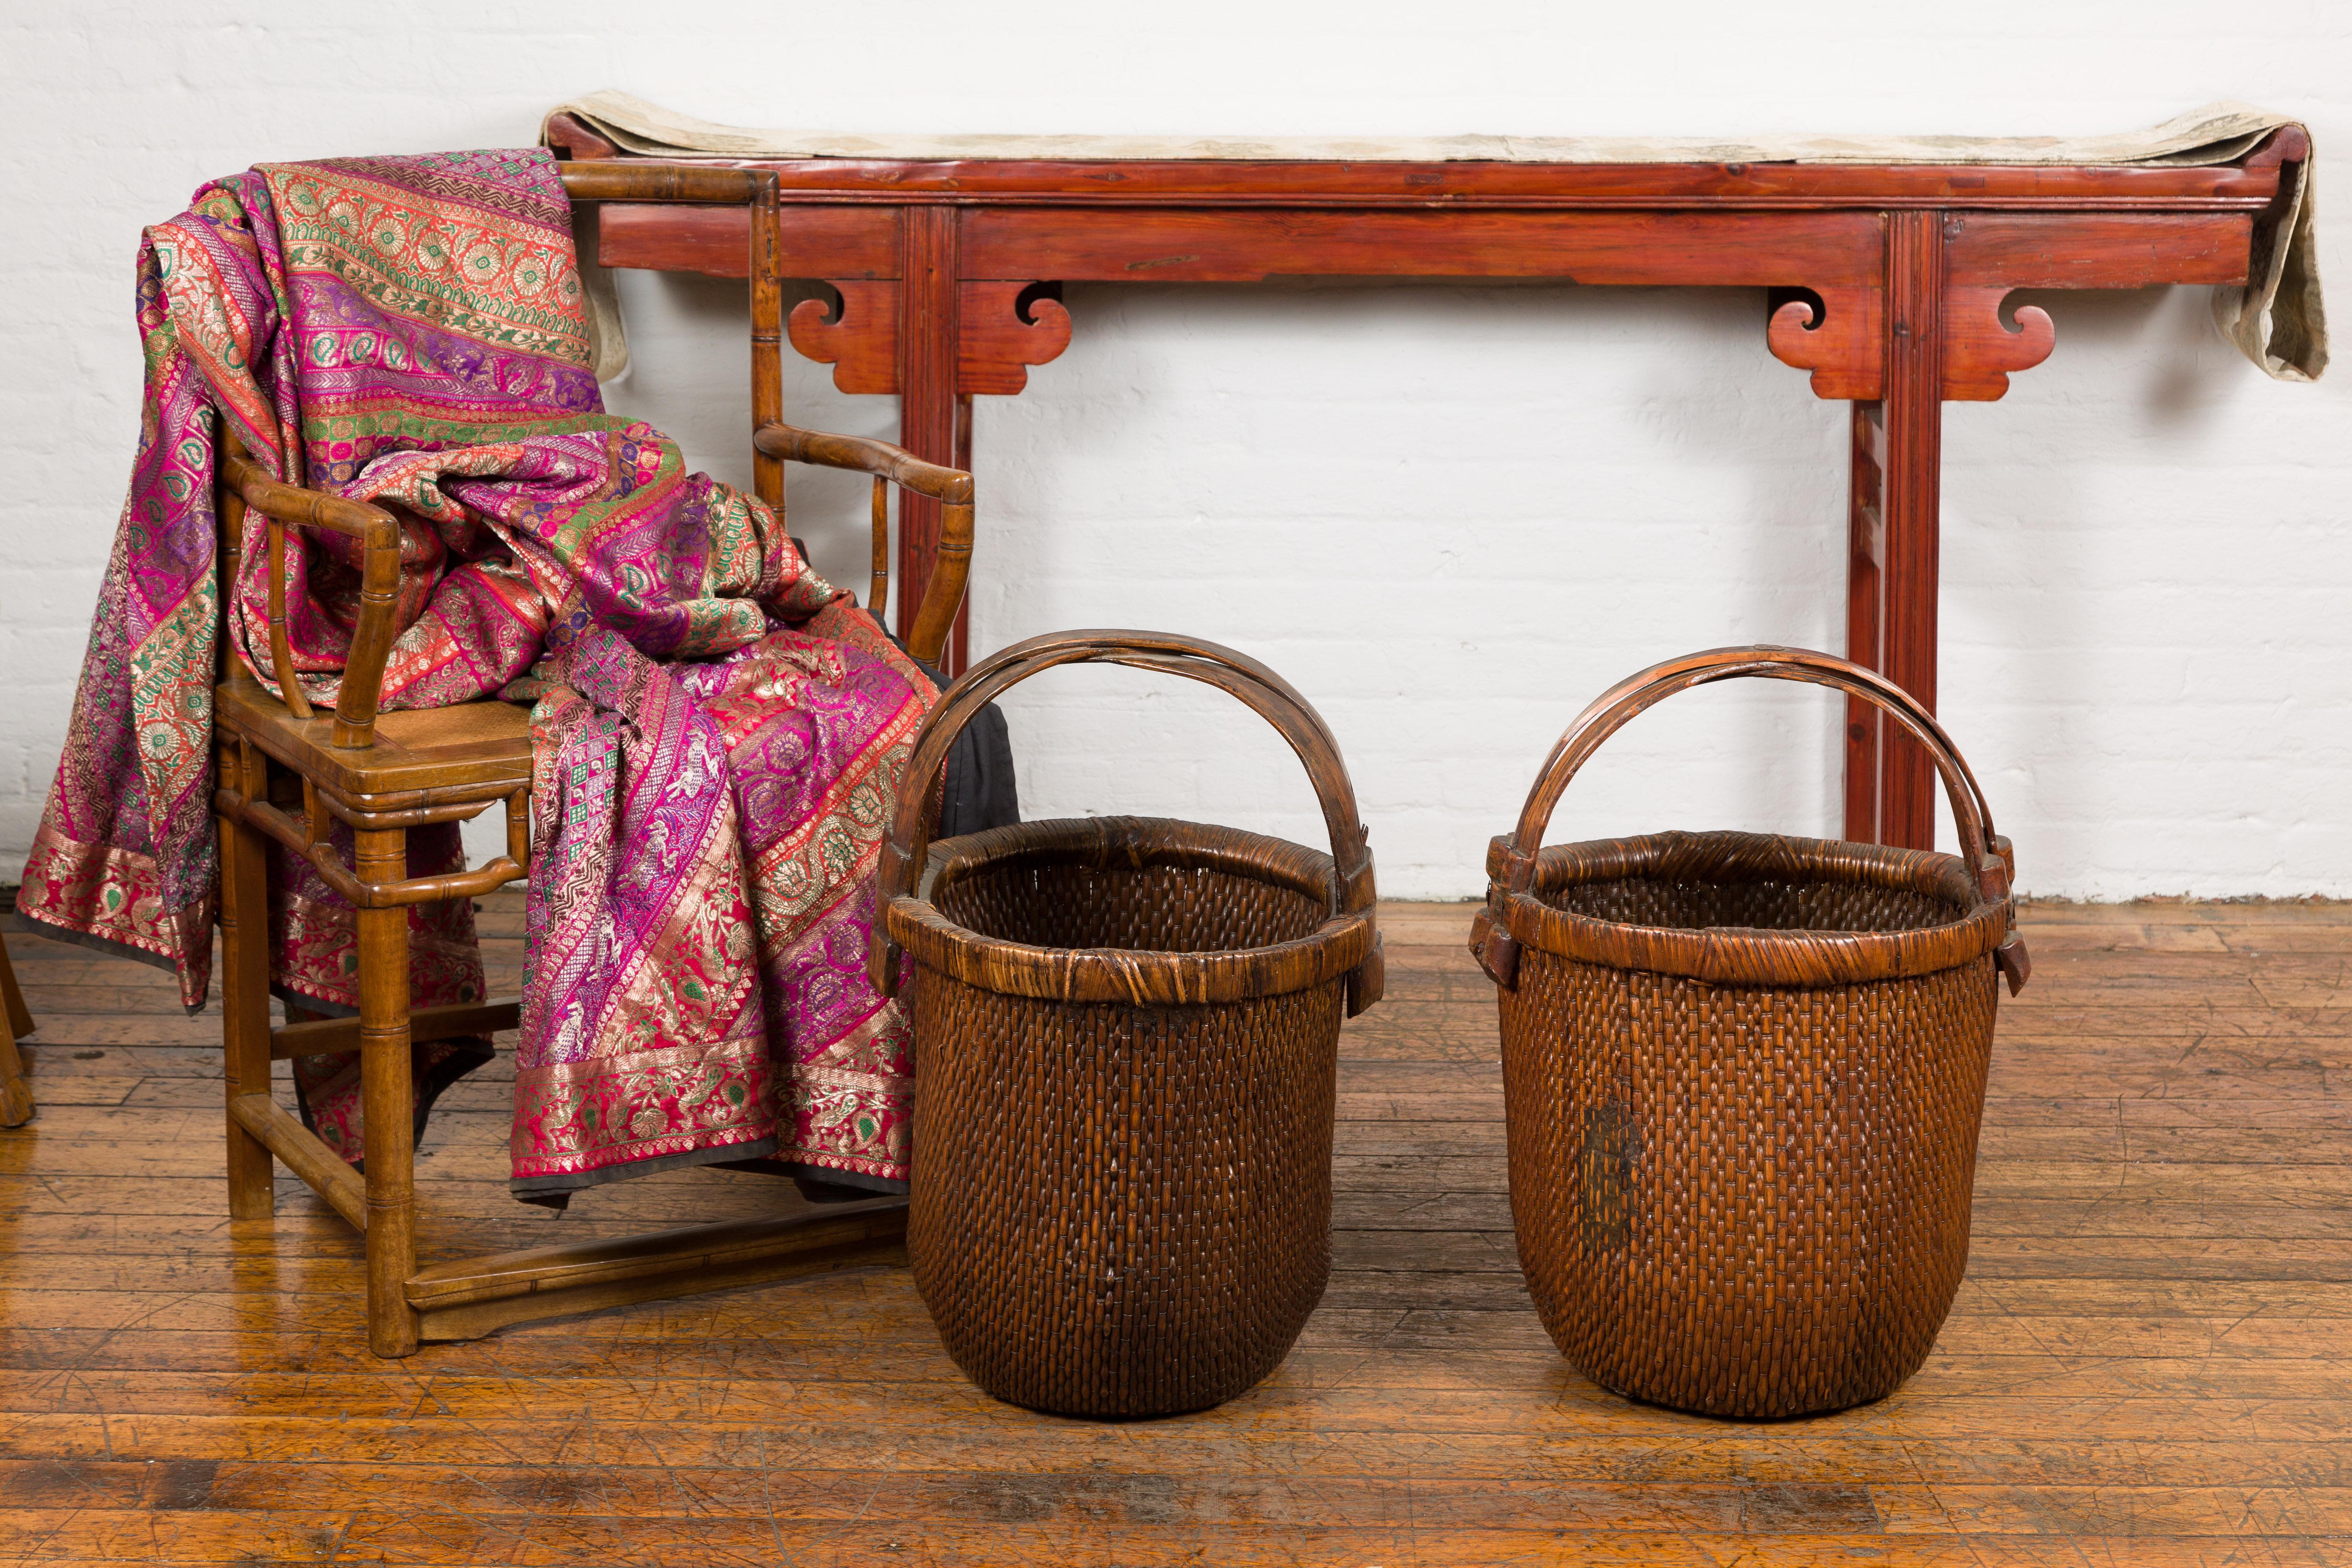 Two willow grain baskets with wooden handles and rustic character. Embrace the rustic charm and rich history with these two Chinese antique willow grain baskets, which are the epitome of pastoral elegance. Over 60 years old, these baskets, with